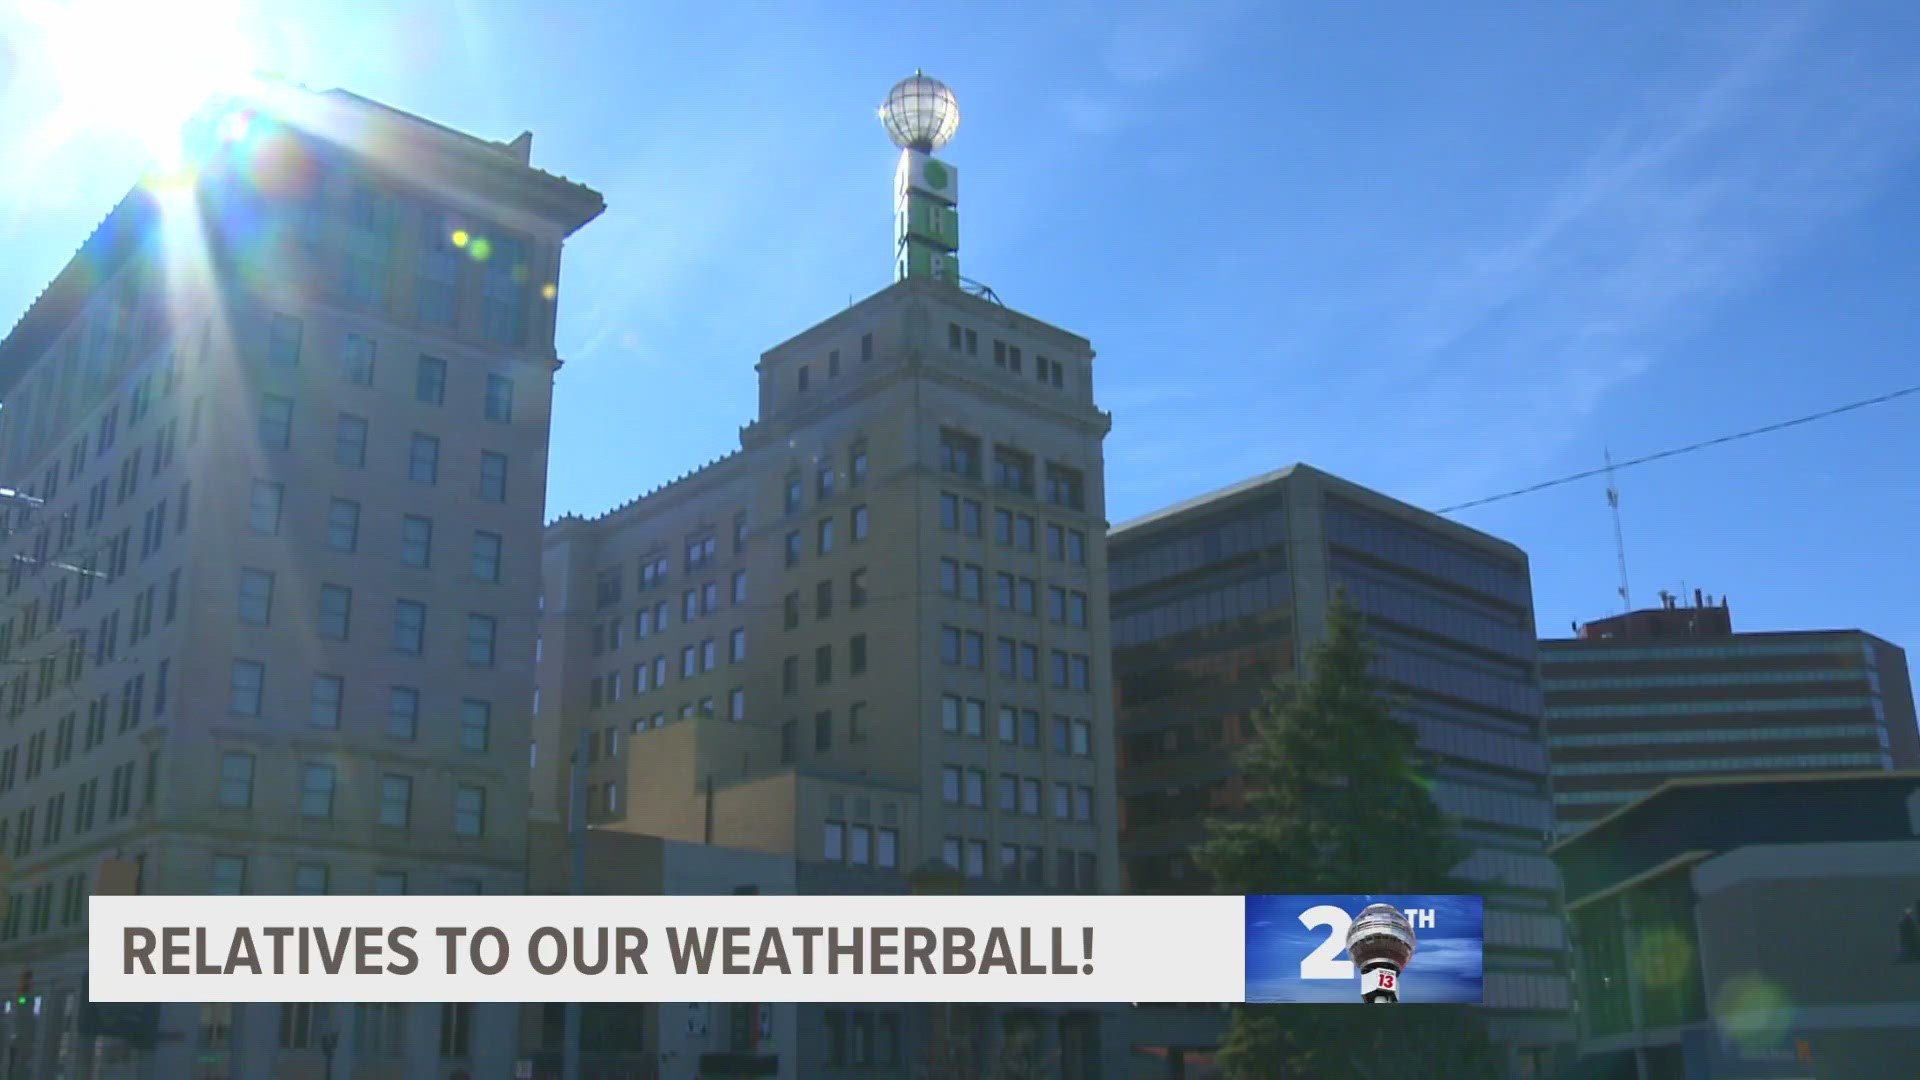 The 13 Weatherball is not the only weather beacon in the state. Michael Behrens tells us more about the Flint weatherball.